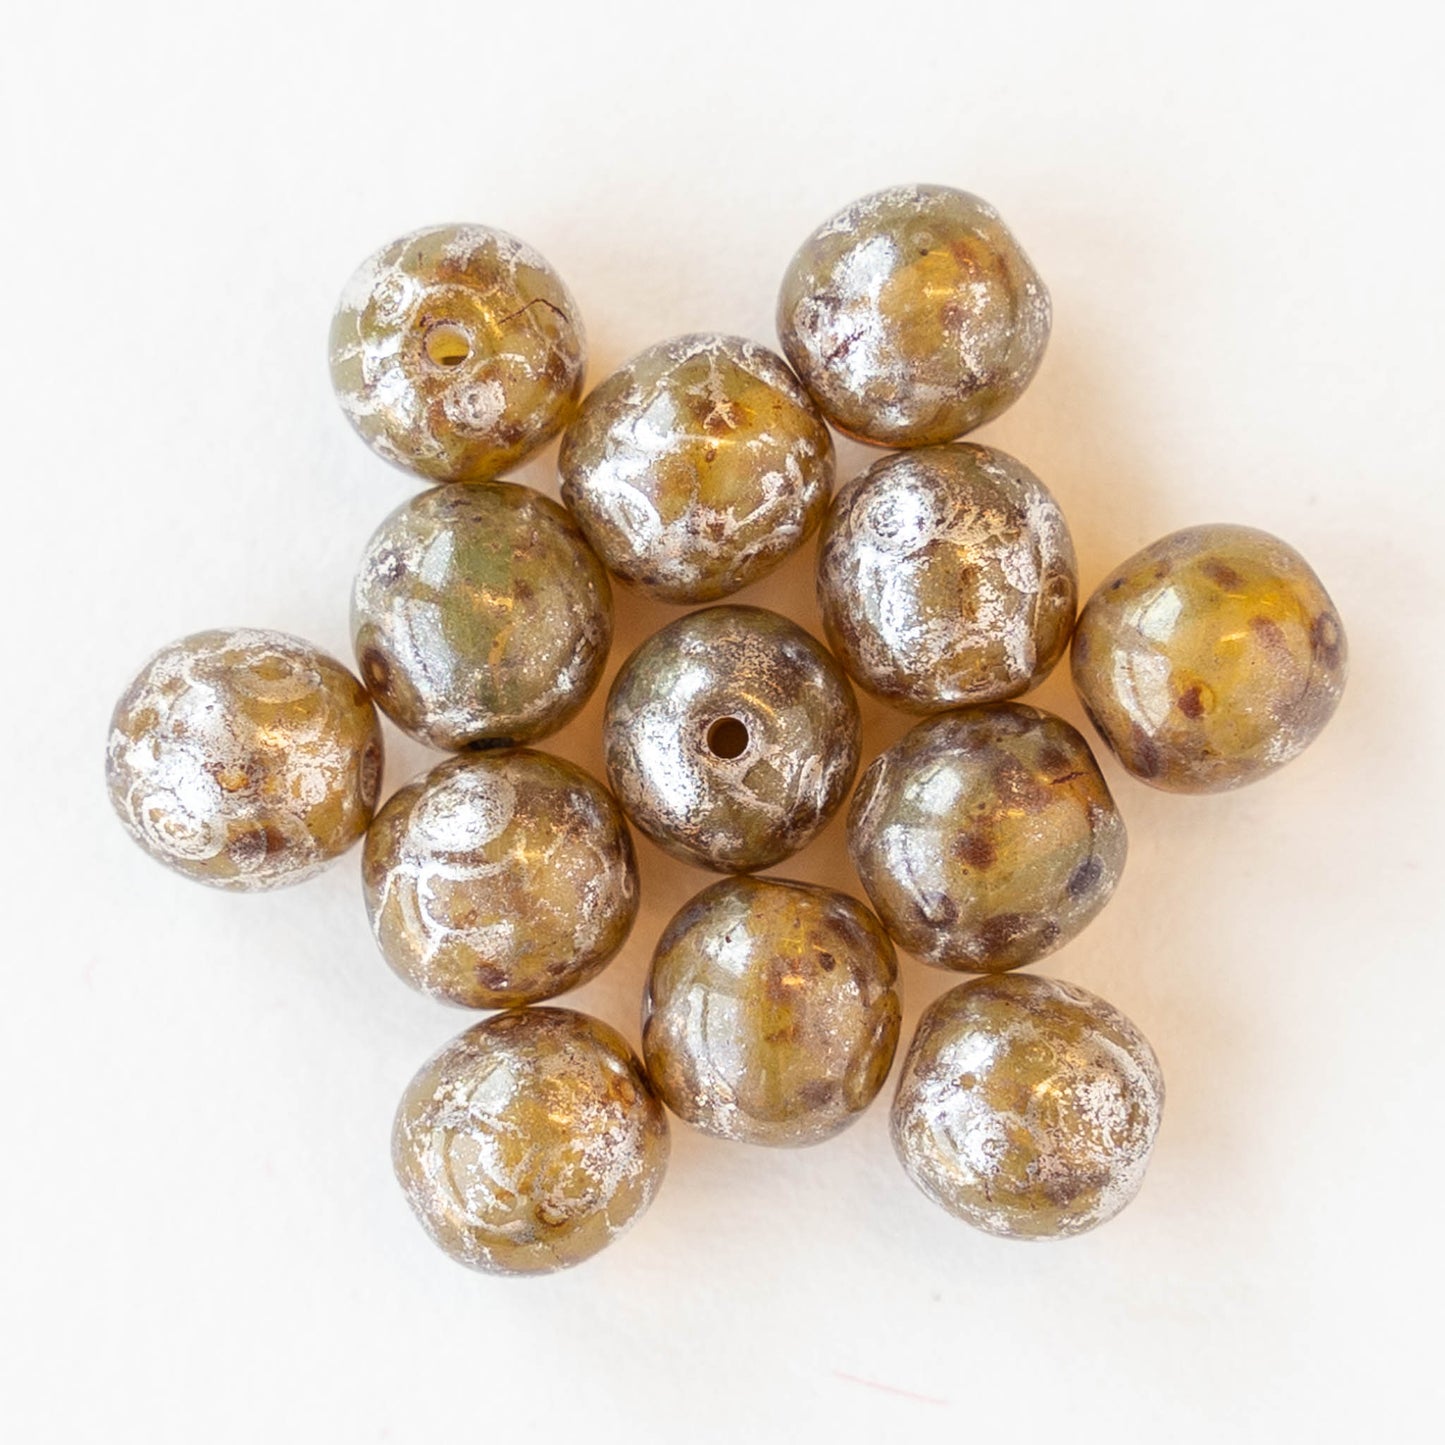 6mm Round Glass Beads - Amber Topaz with a Silvery Finish - 50 beads